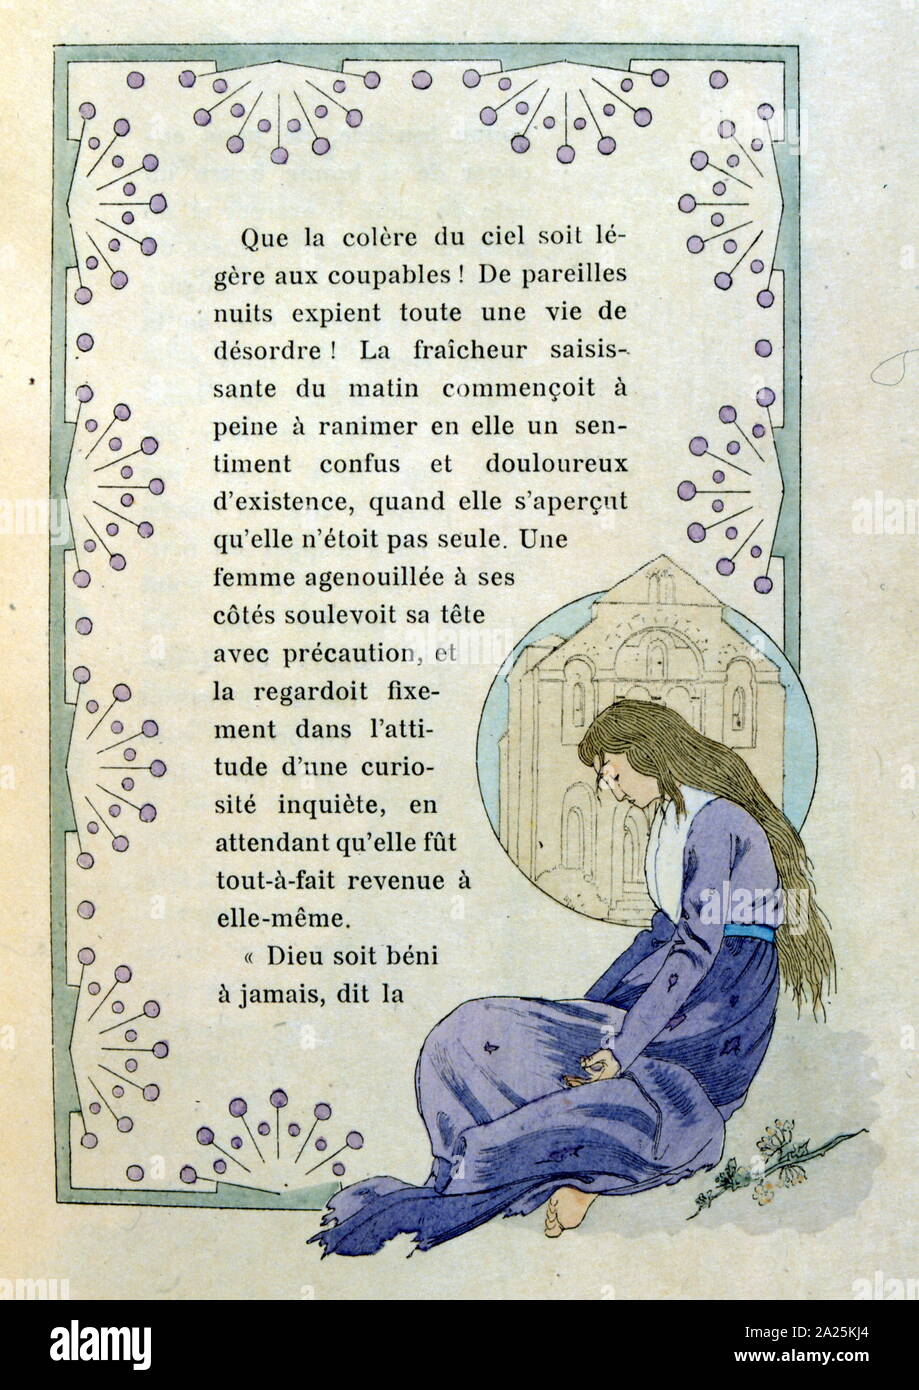 Illustration by Henri Caruchet (1873-1948); for 'La Légende de soeur  Béatrix' by Charles Nodier (1780-1844), 1903. coloured plate illustration  with borders and ornaments. This is Nodier's short story based on the legend